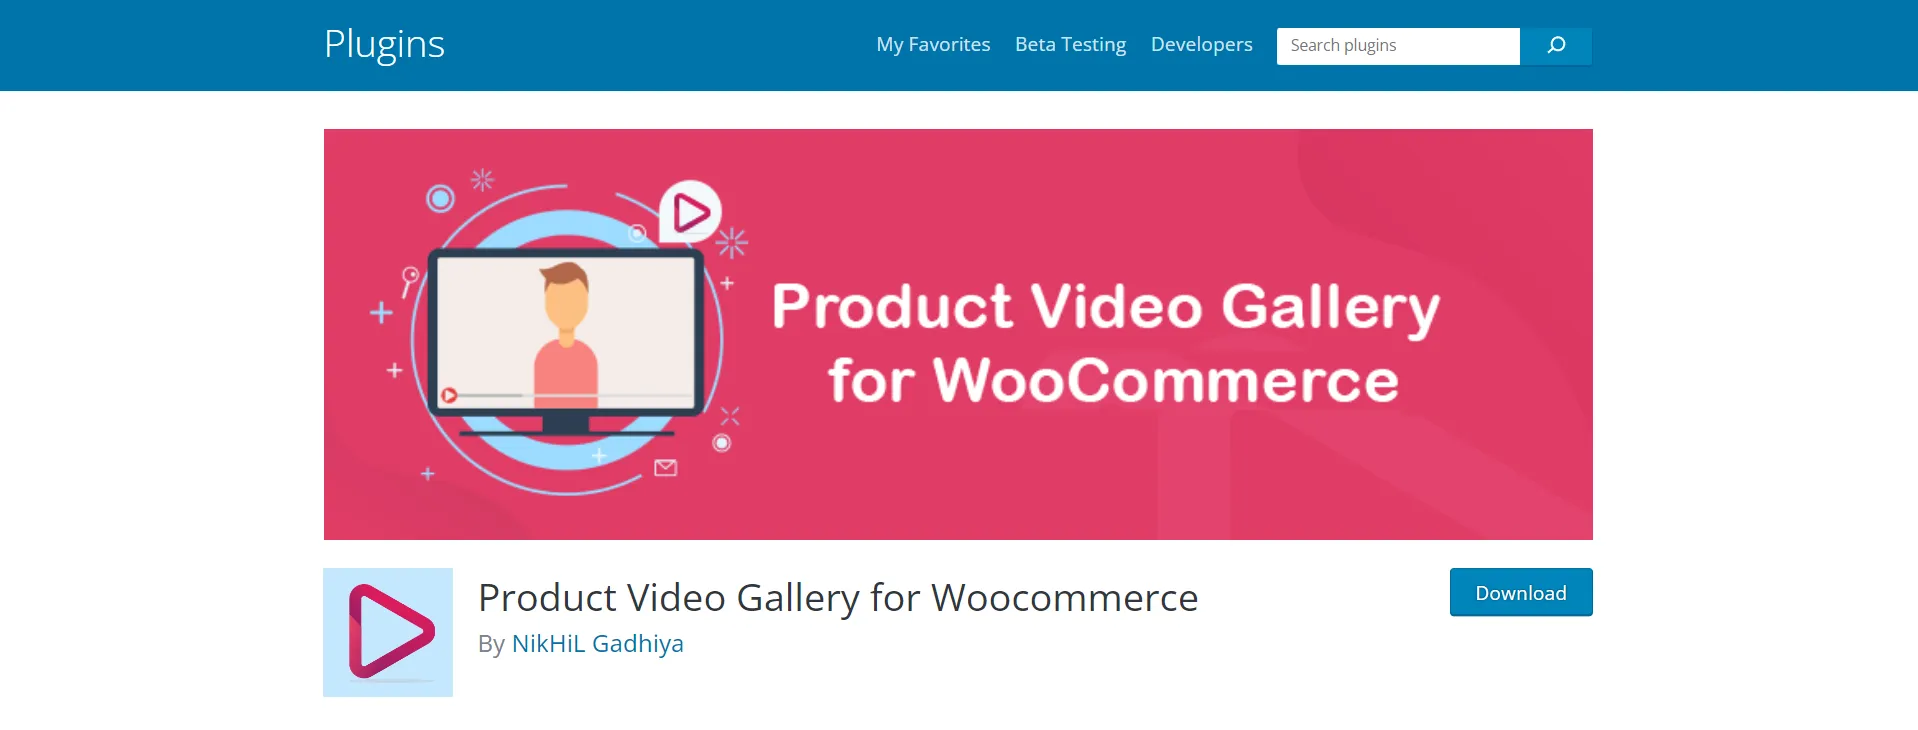 Product Video Gallery for WooCommerce plugin